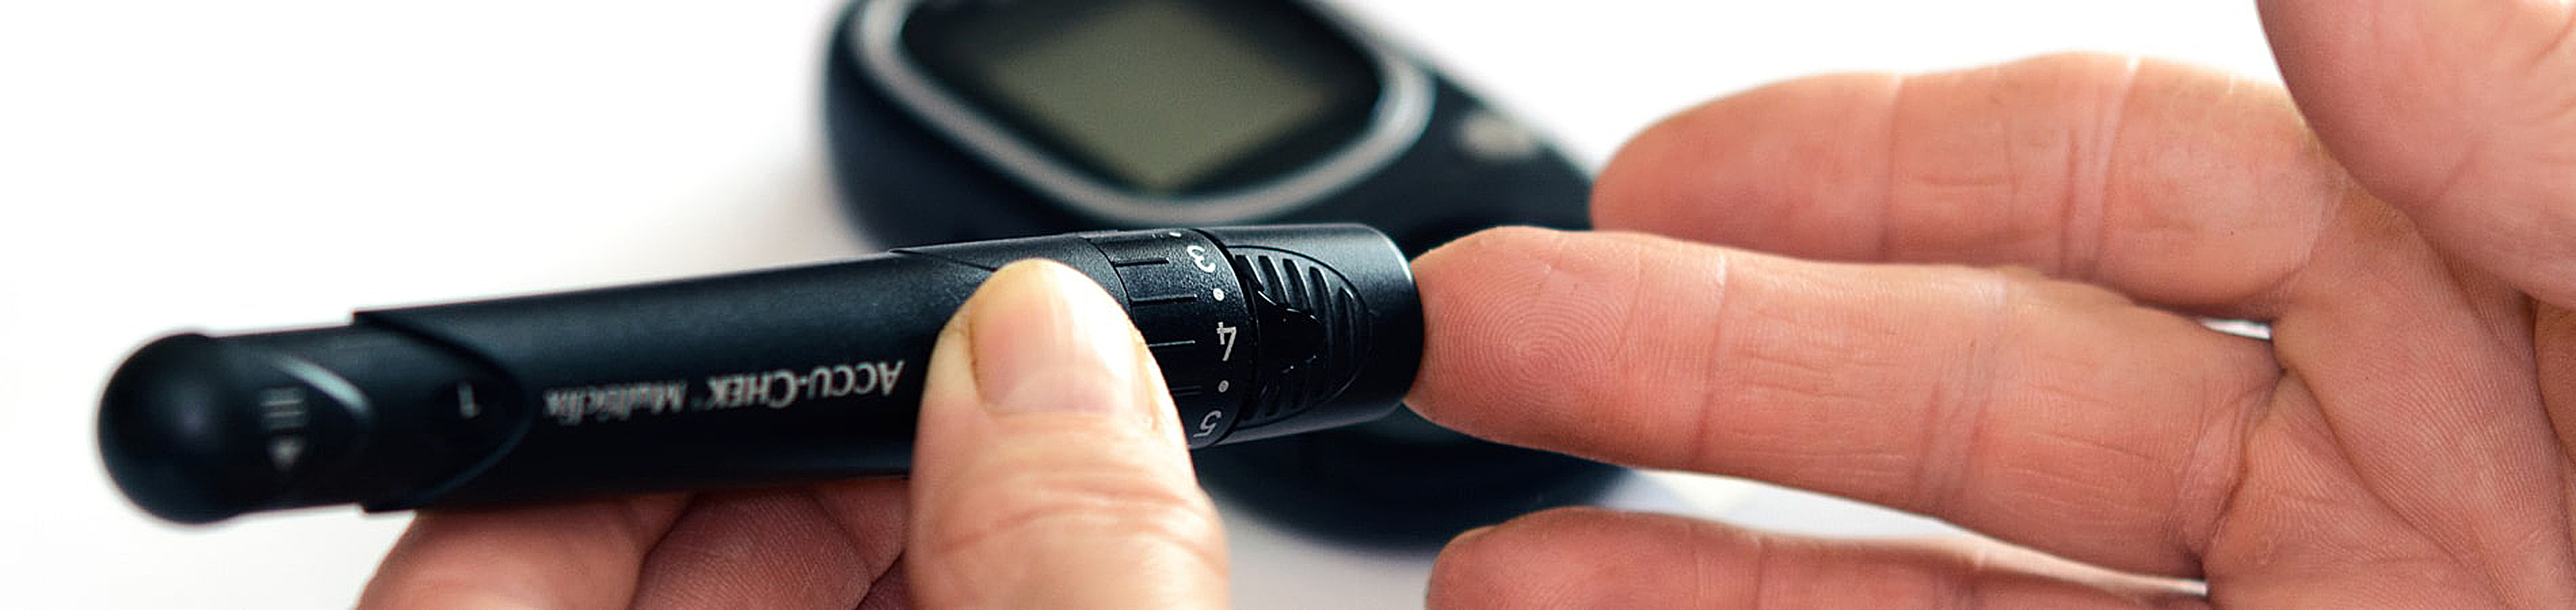 Interesting facts about blood glucose control for...